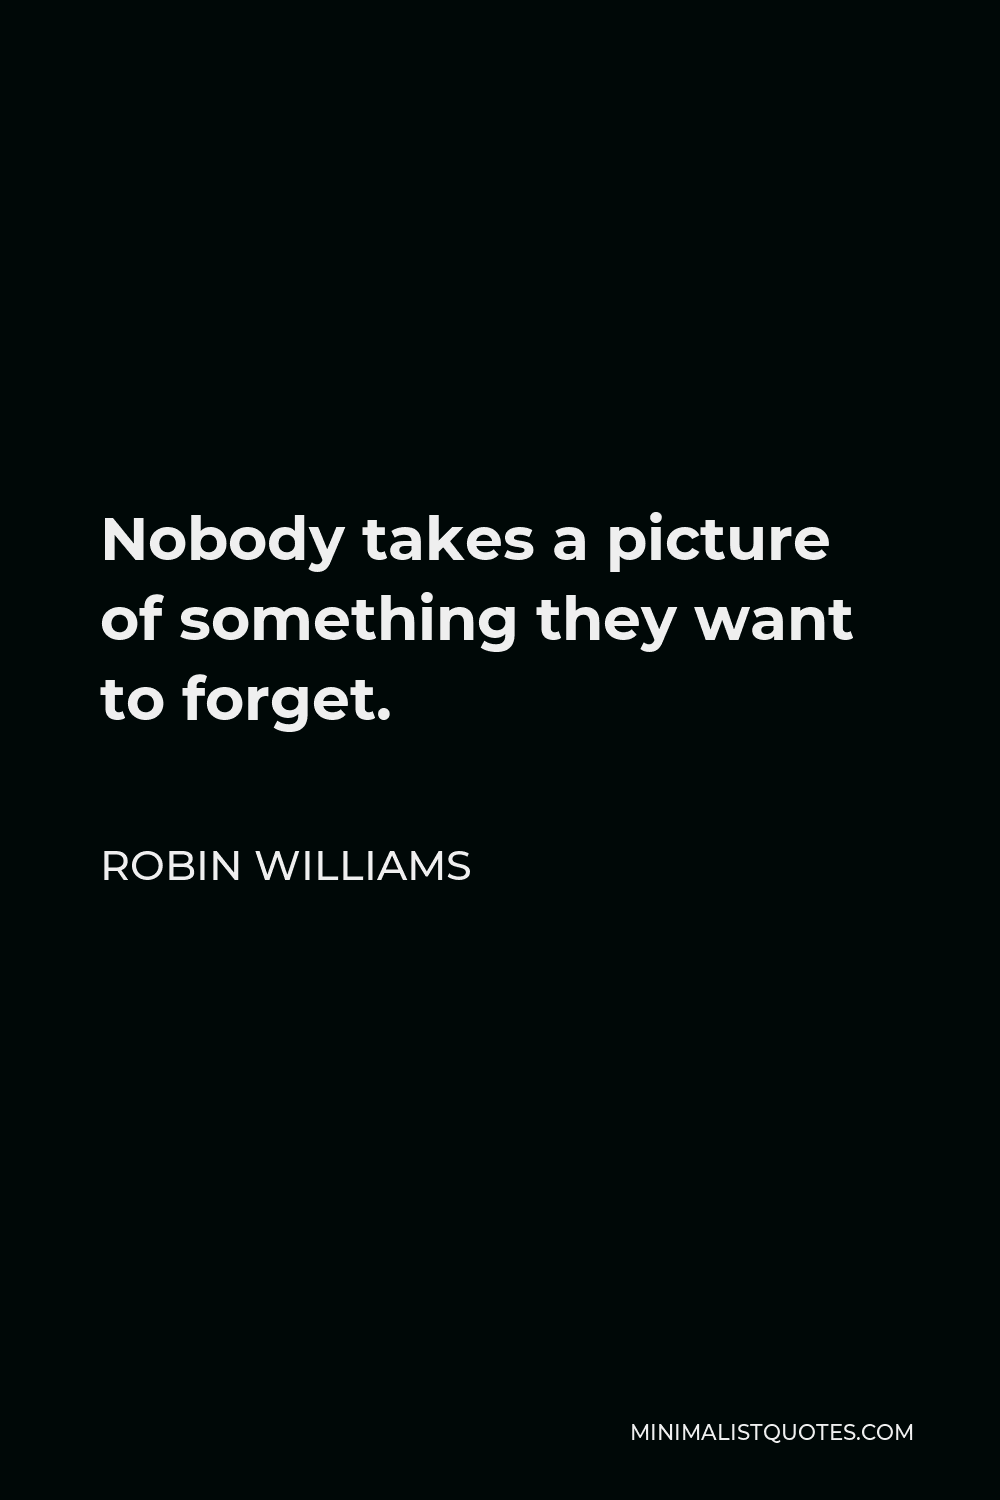 Robin Williams Quote - Nobody takes a picture of something they want to forget.